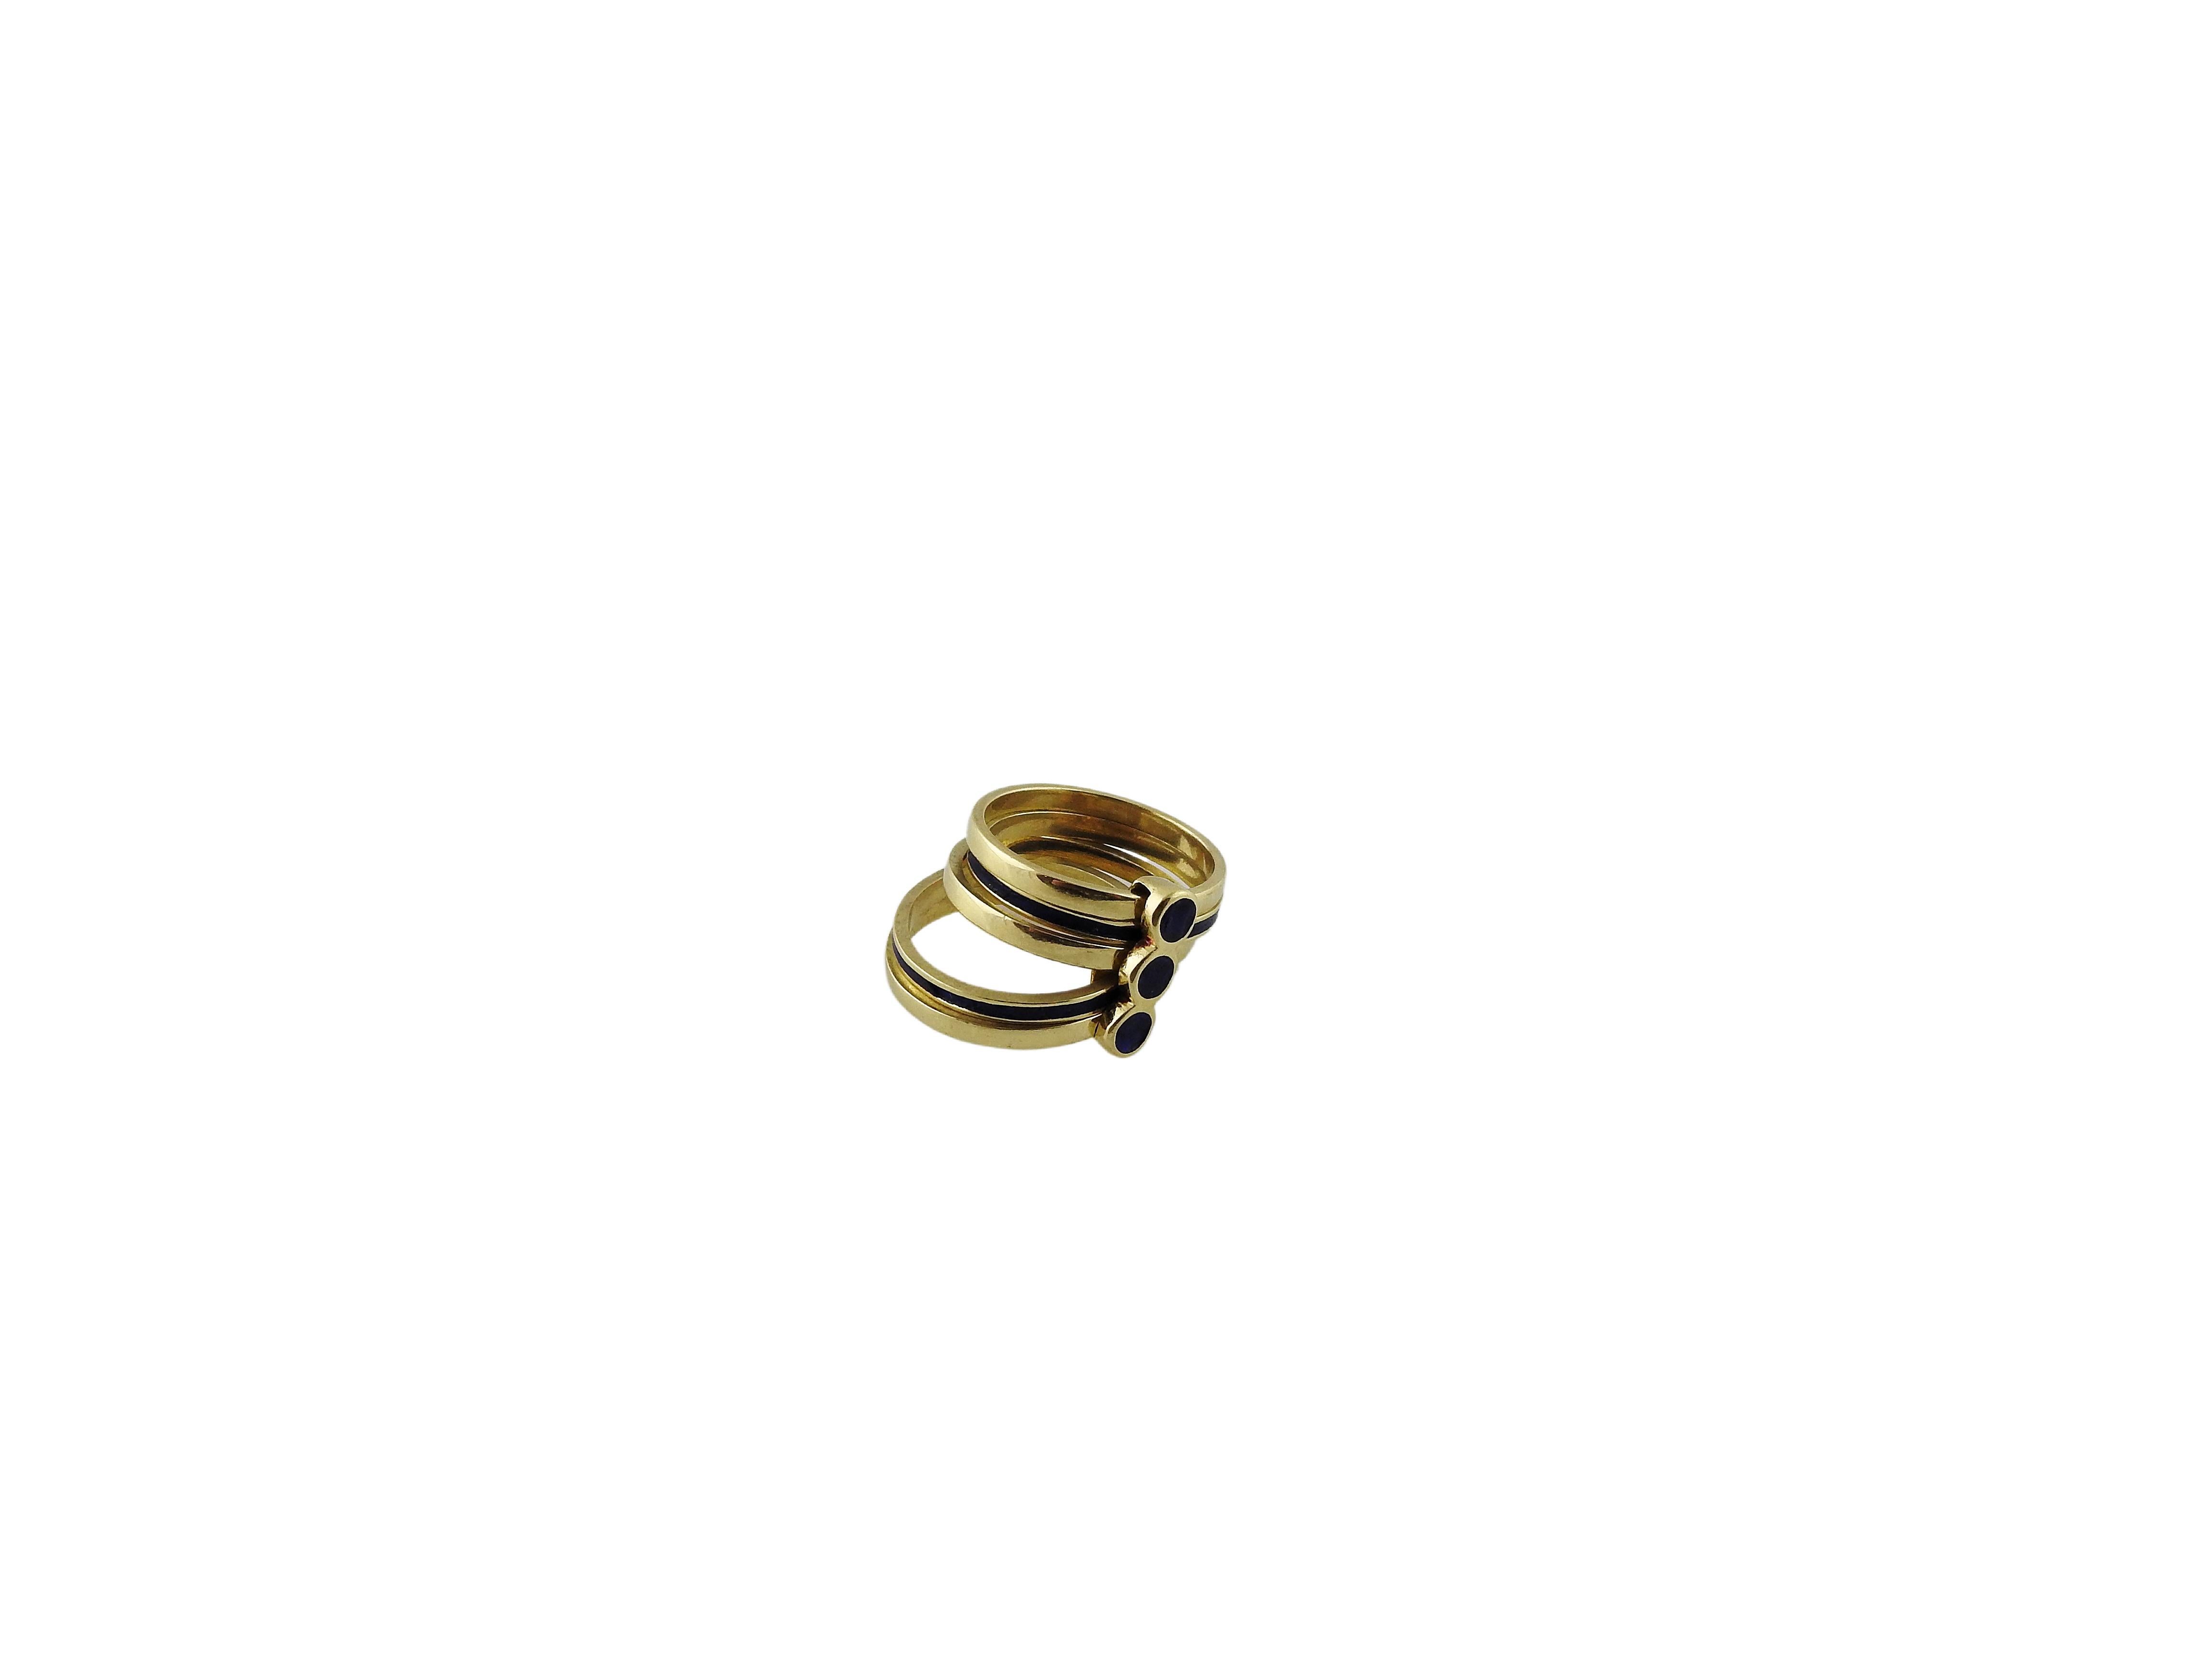 Vintage Gucci 18K Yellow Gold and Blue Enamel Ring

This vintage Gucci ring is set in 18K yellow gold with blue enamel accents

3 yellow gold band and 2 gold bands with blue enamel are attached with a vertical row of yellow gold accented with blue